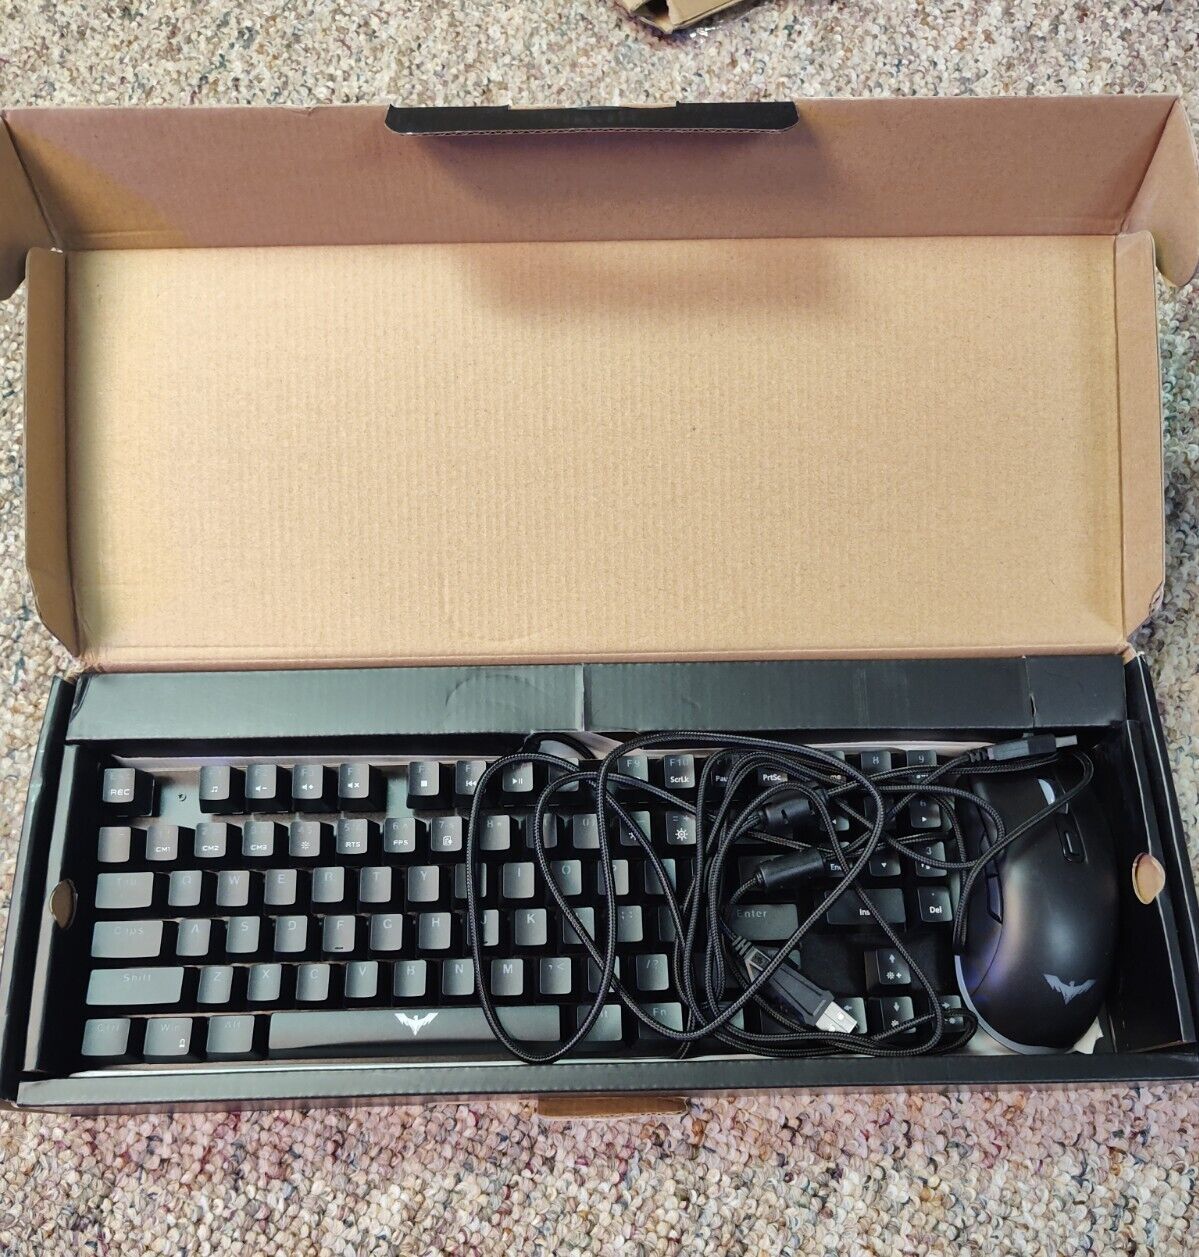 Havit Mechanical Keyboard and Mouse Combo (KB486L)